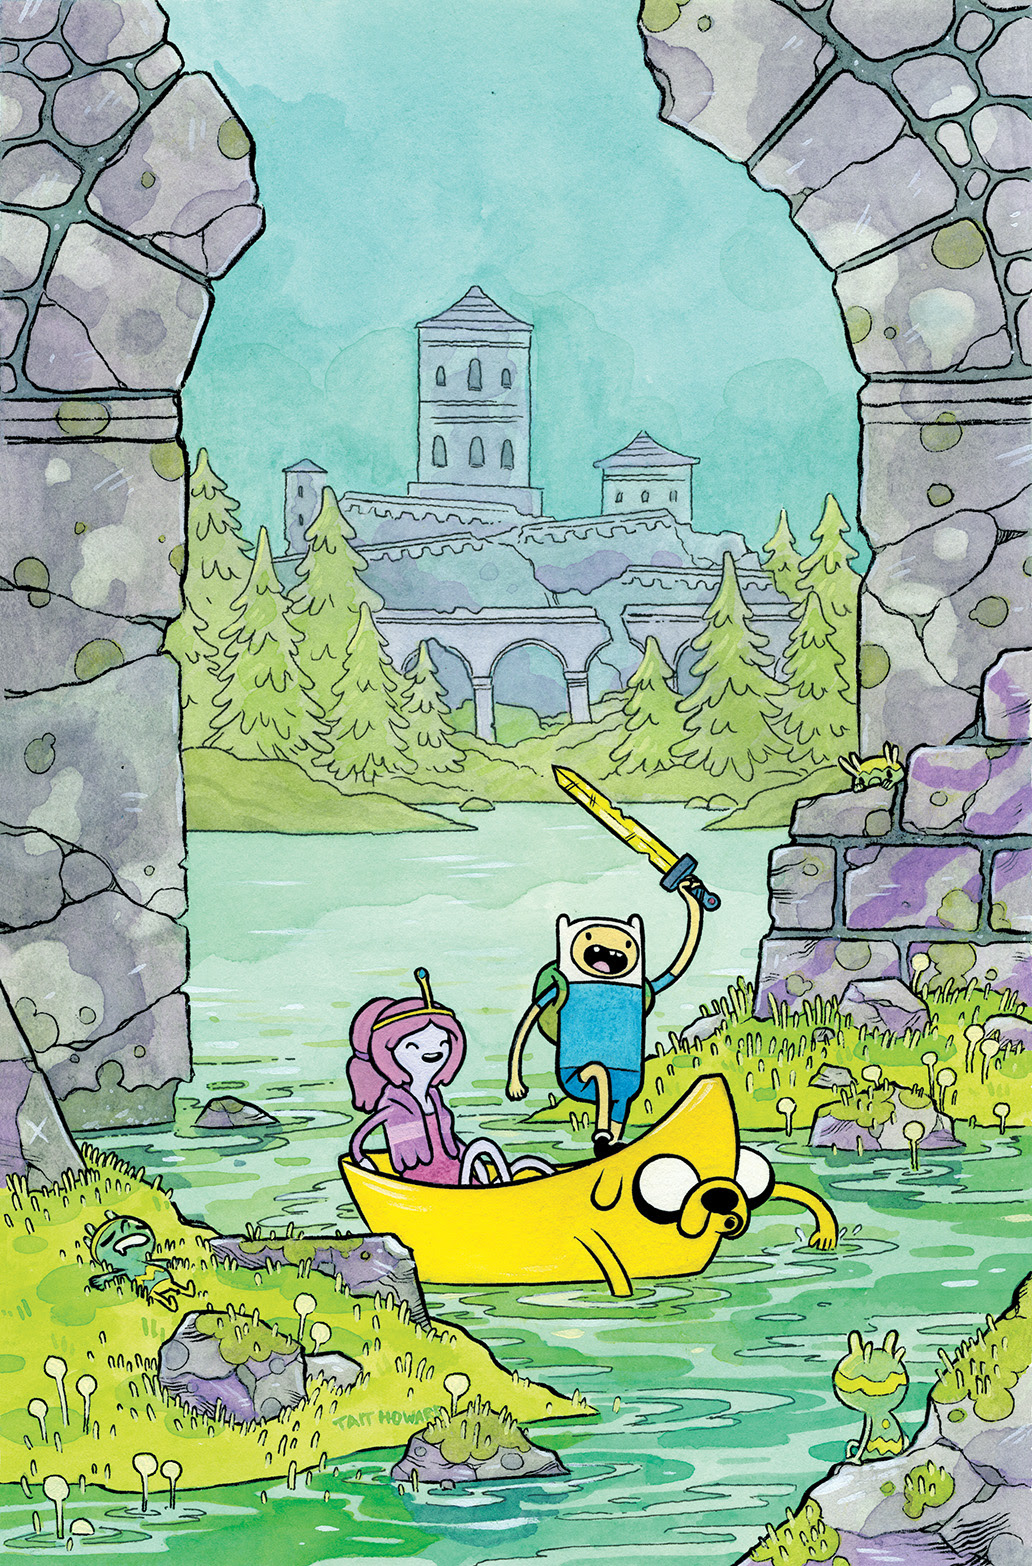 ADVENTURE TIME #32 Cover B by Tait Howard